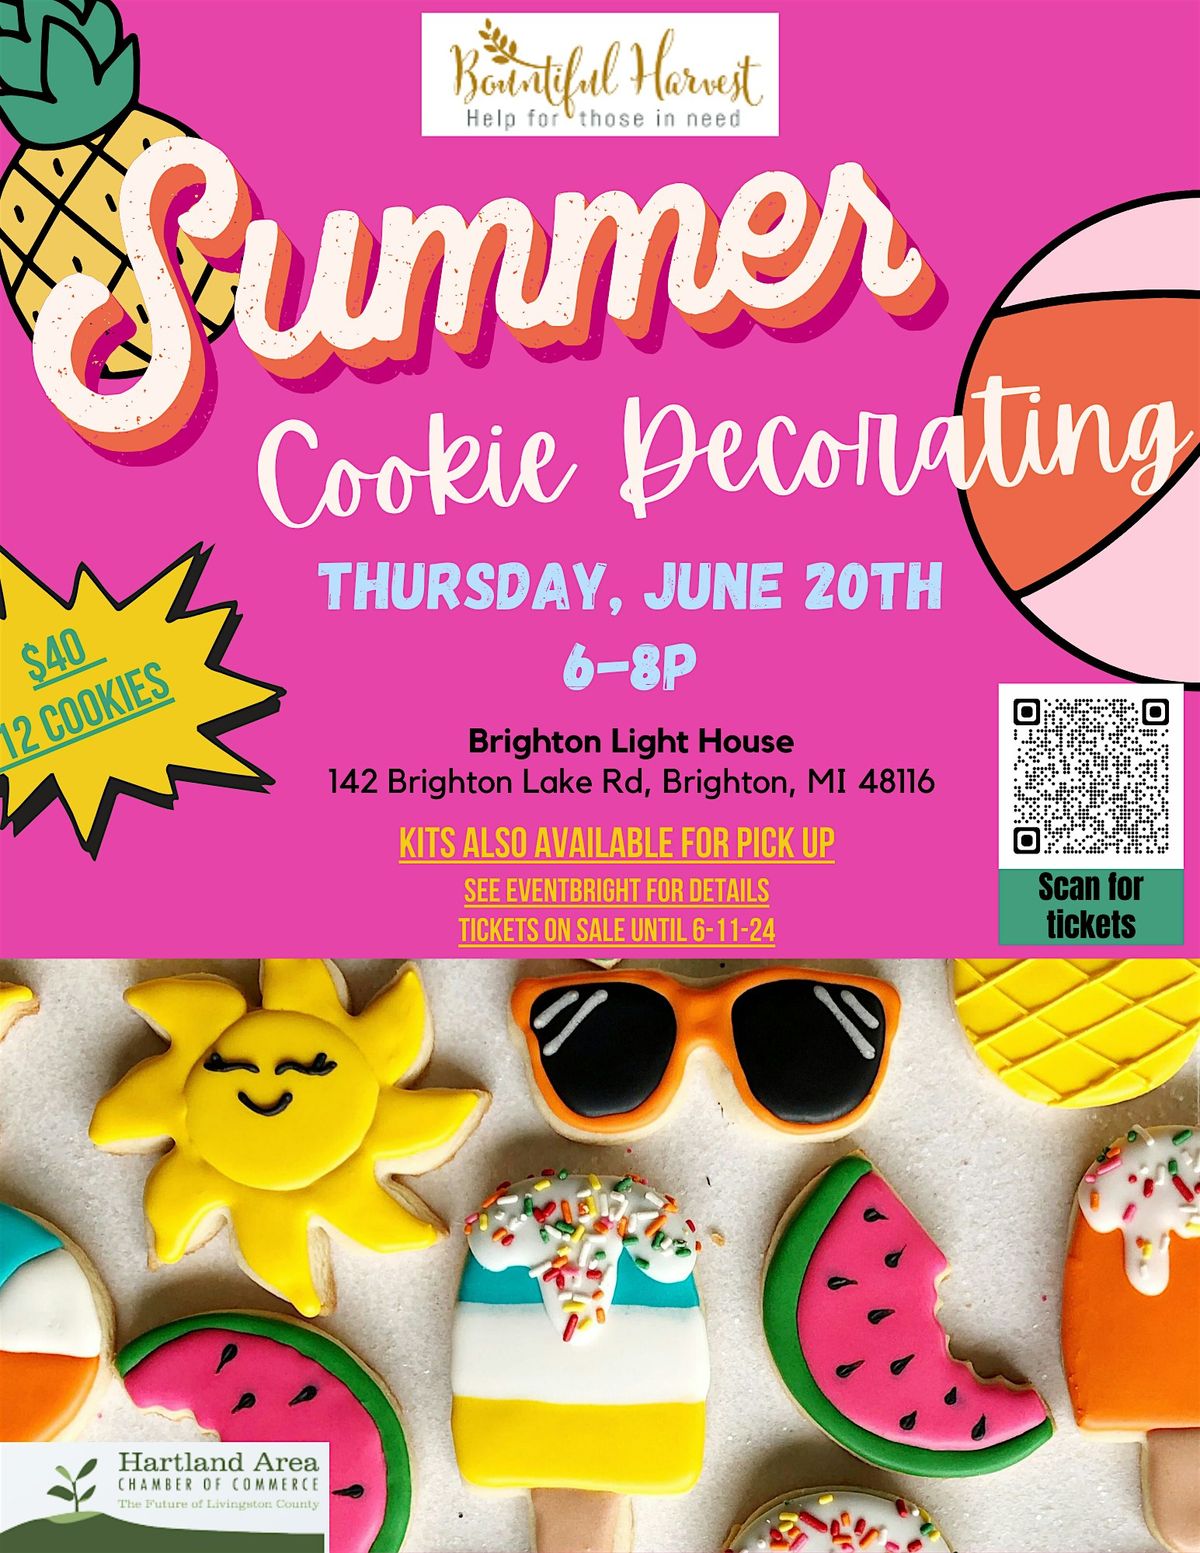 Summertime Cookie Decorating class